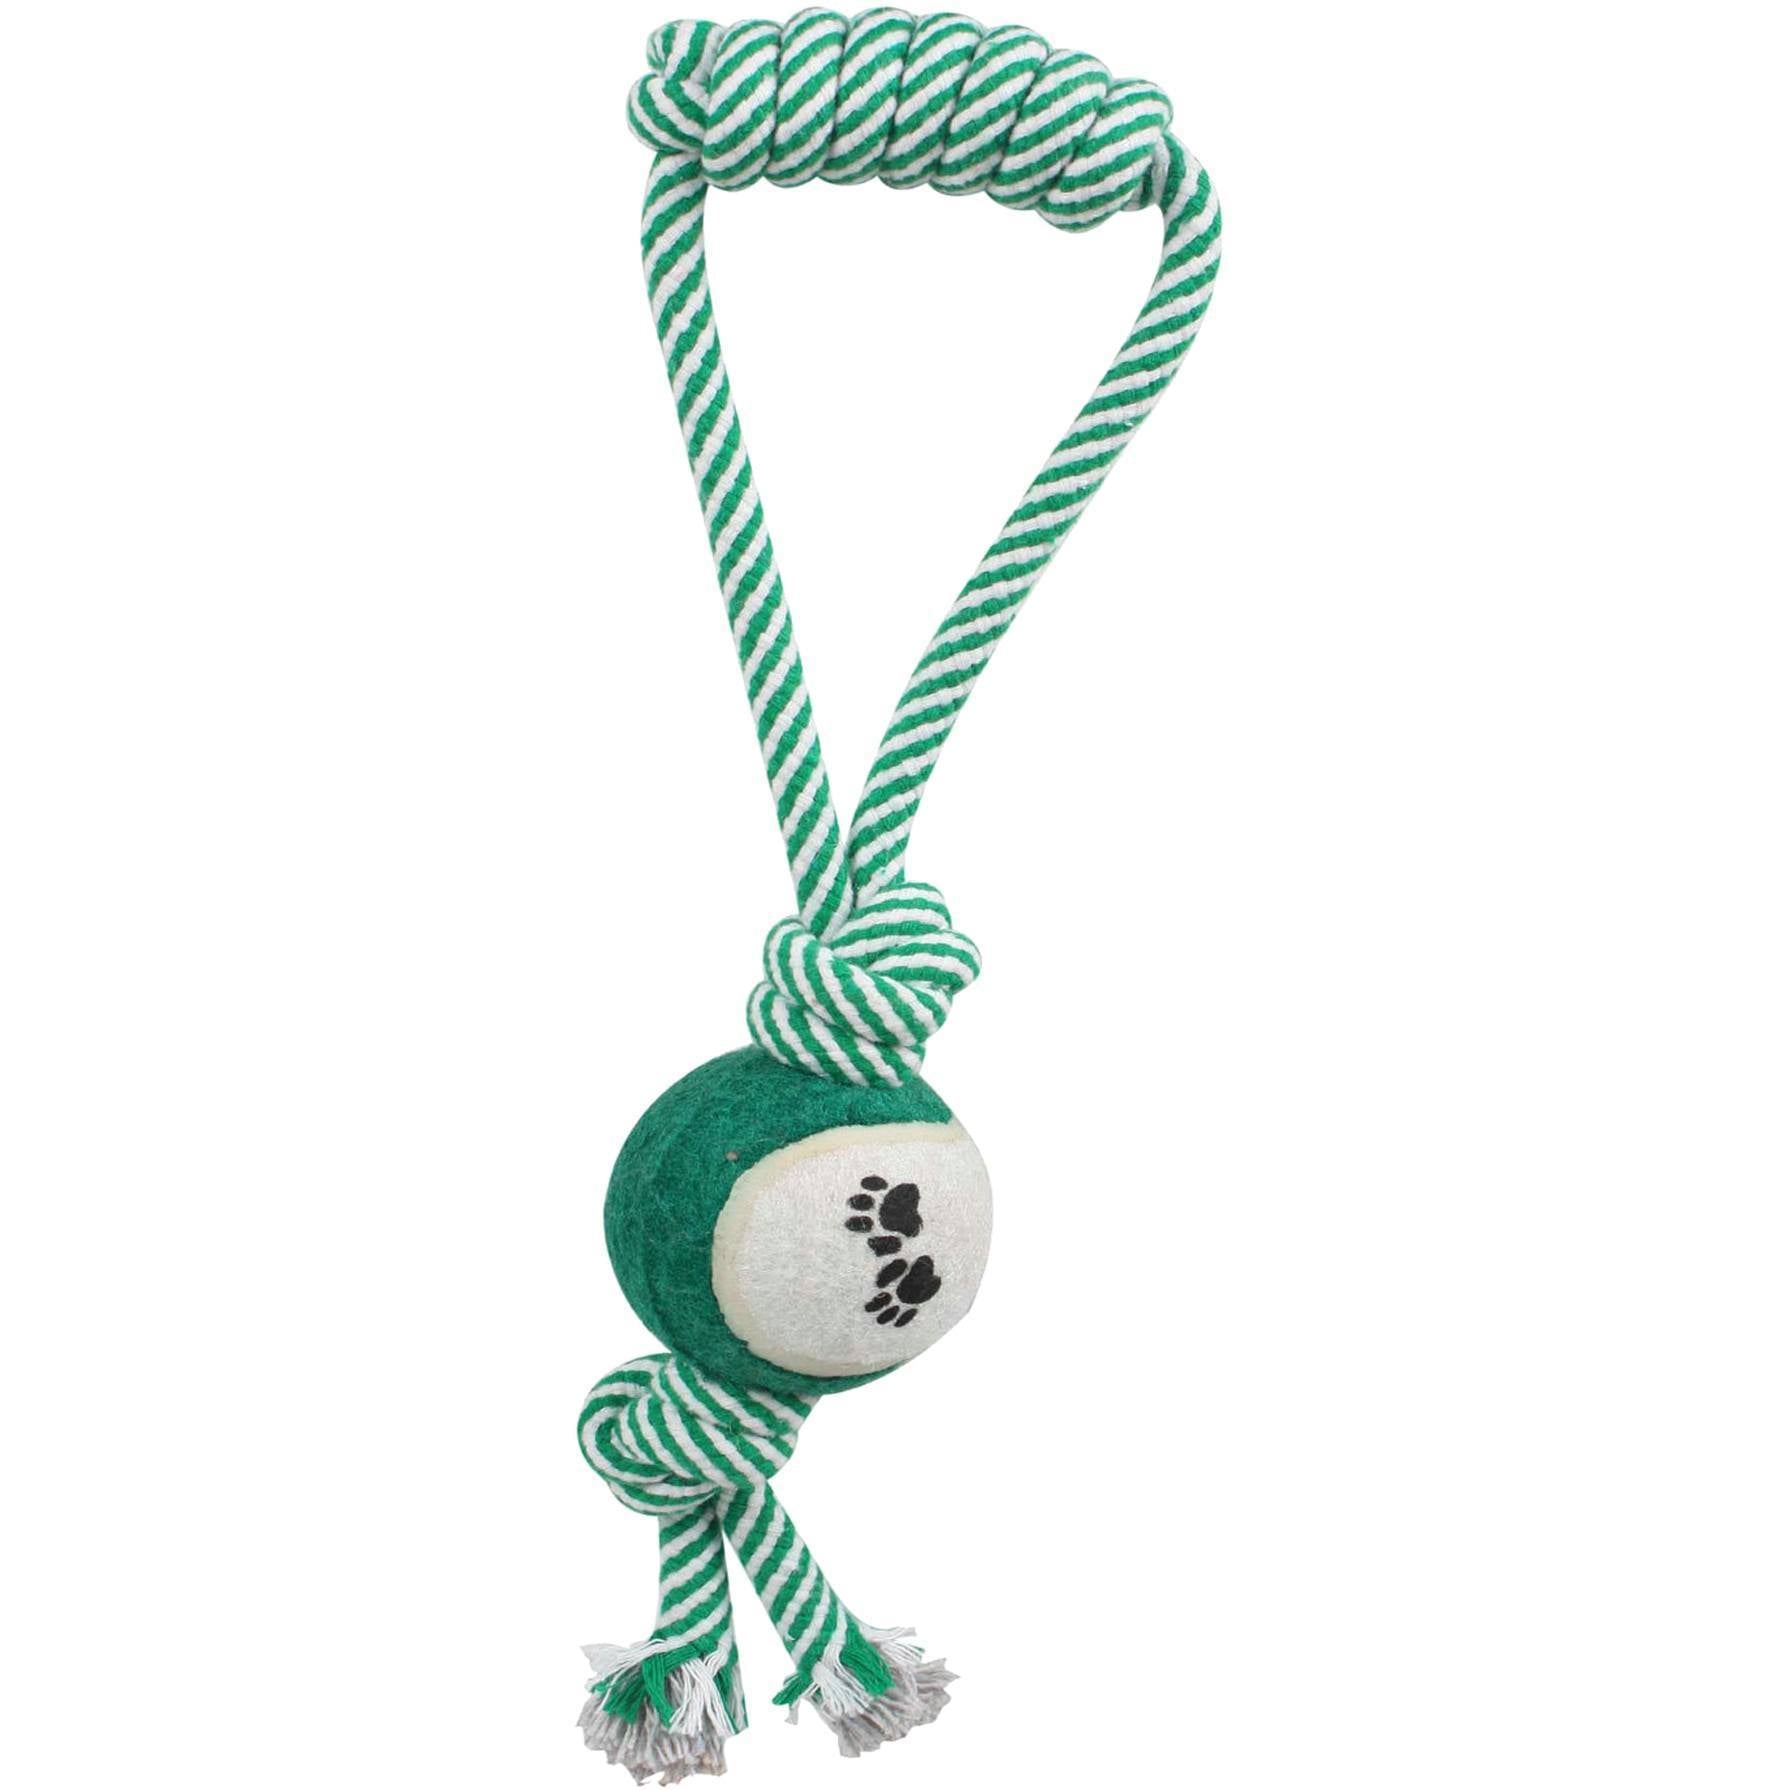 Pet Life ® 'Pull Away' All Natural Jute Rope and Tennis Ball Dog Toy Green 